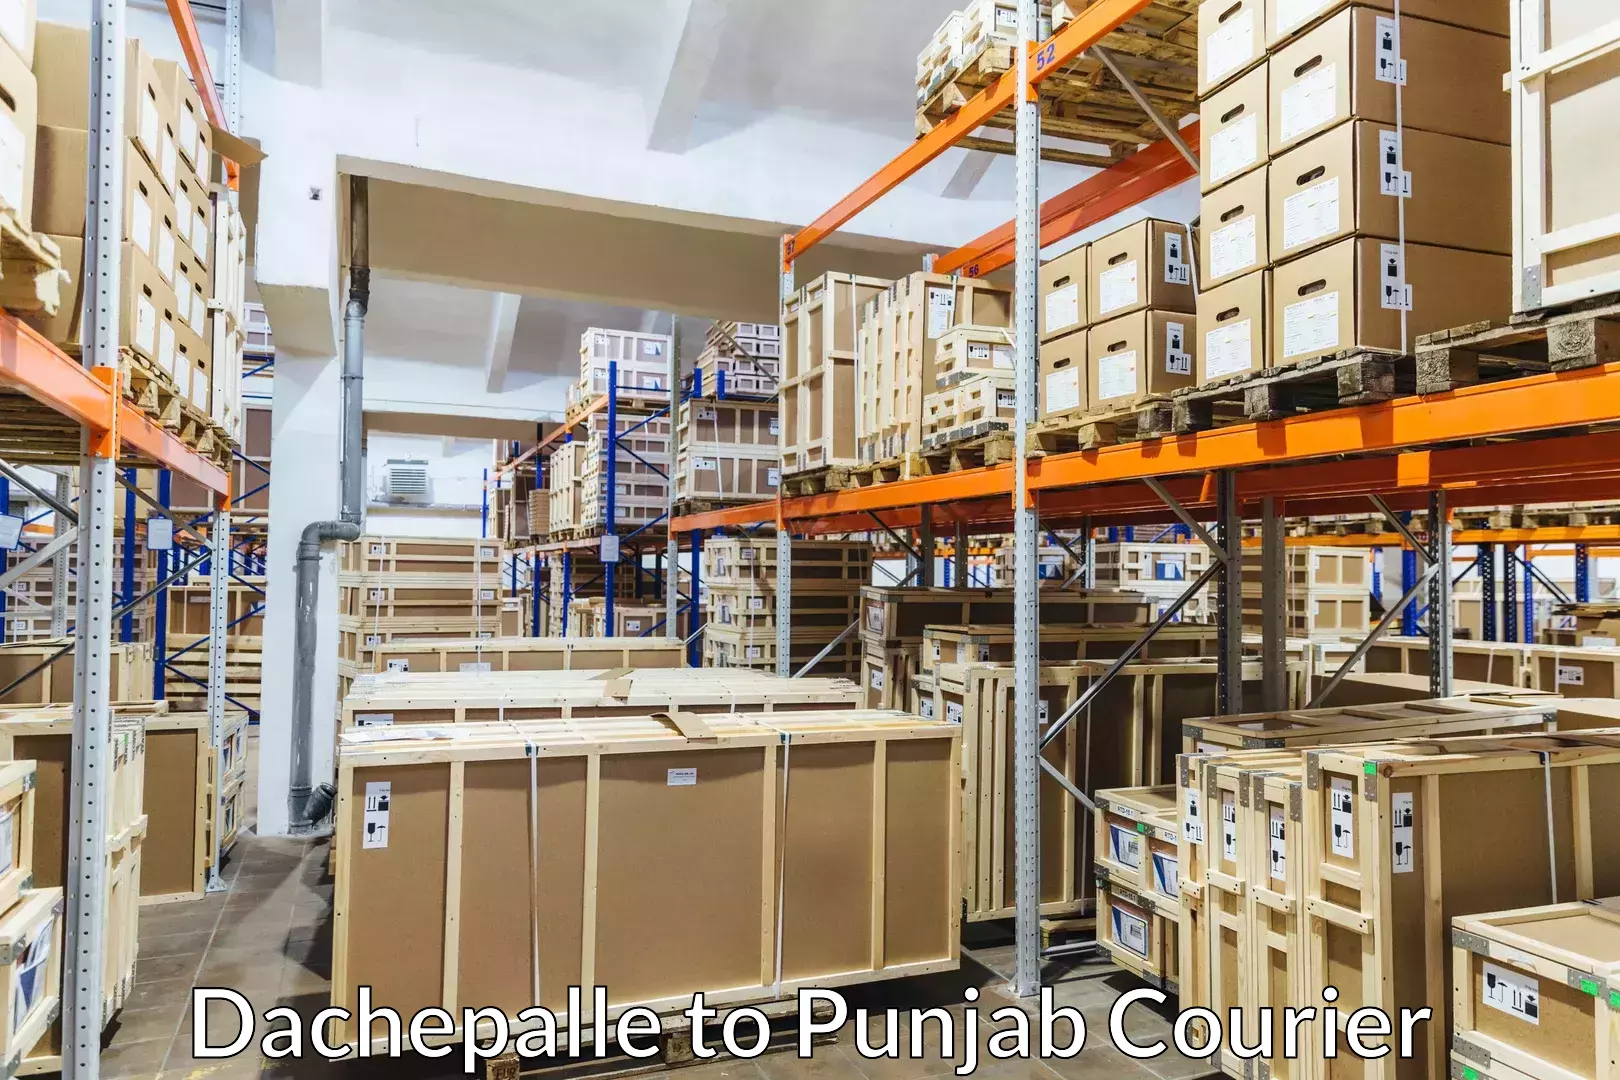 Furniture moving assistance in Dachepalle to Punjab